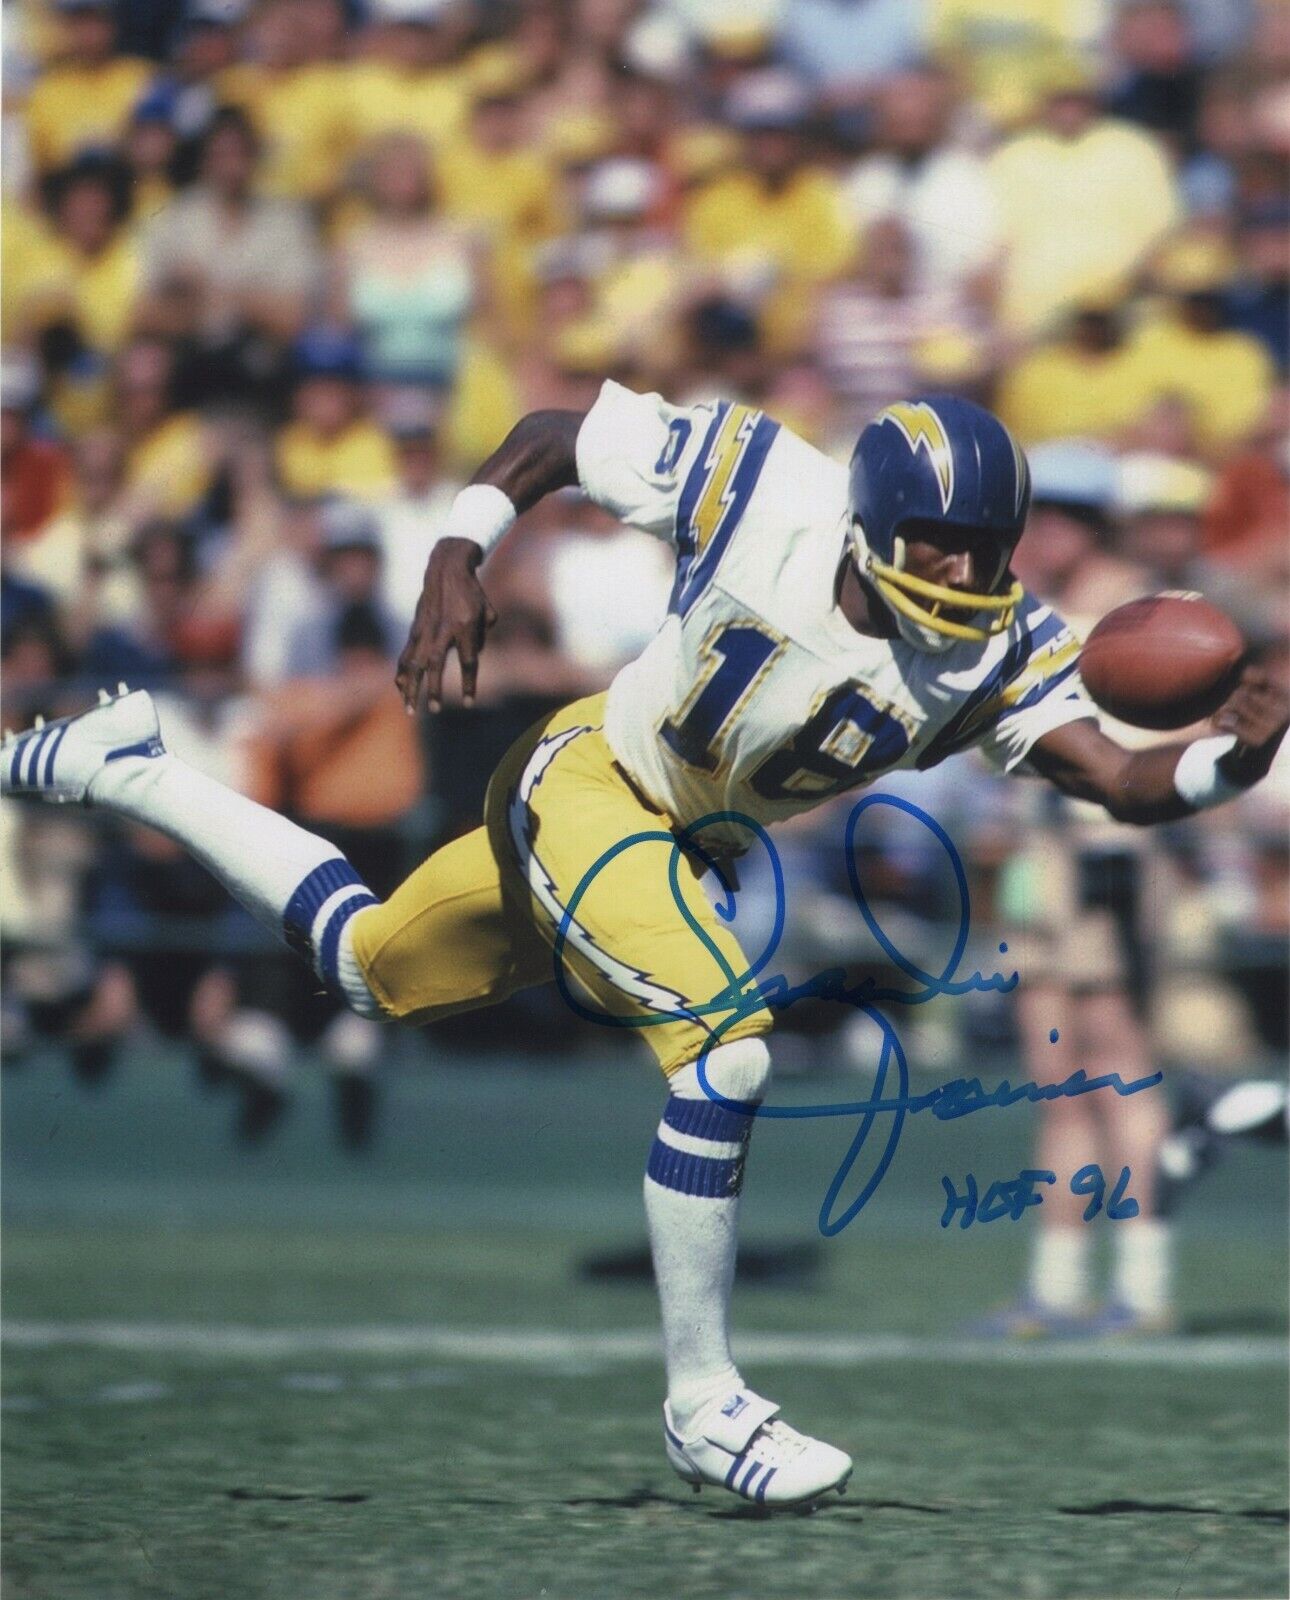 CHARLIE JOINER SIGNED AUTOGRAPH 8X10 Photo Poster painting SAN DIEGO CHARGERS HALL OF FAME #2